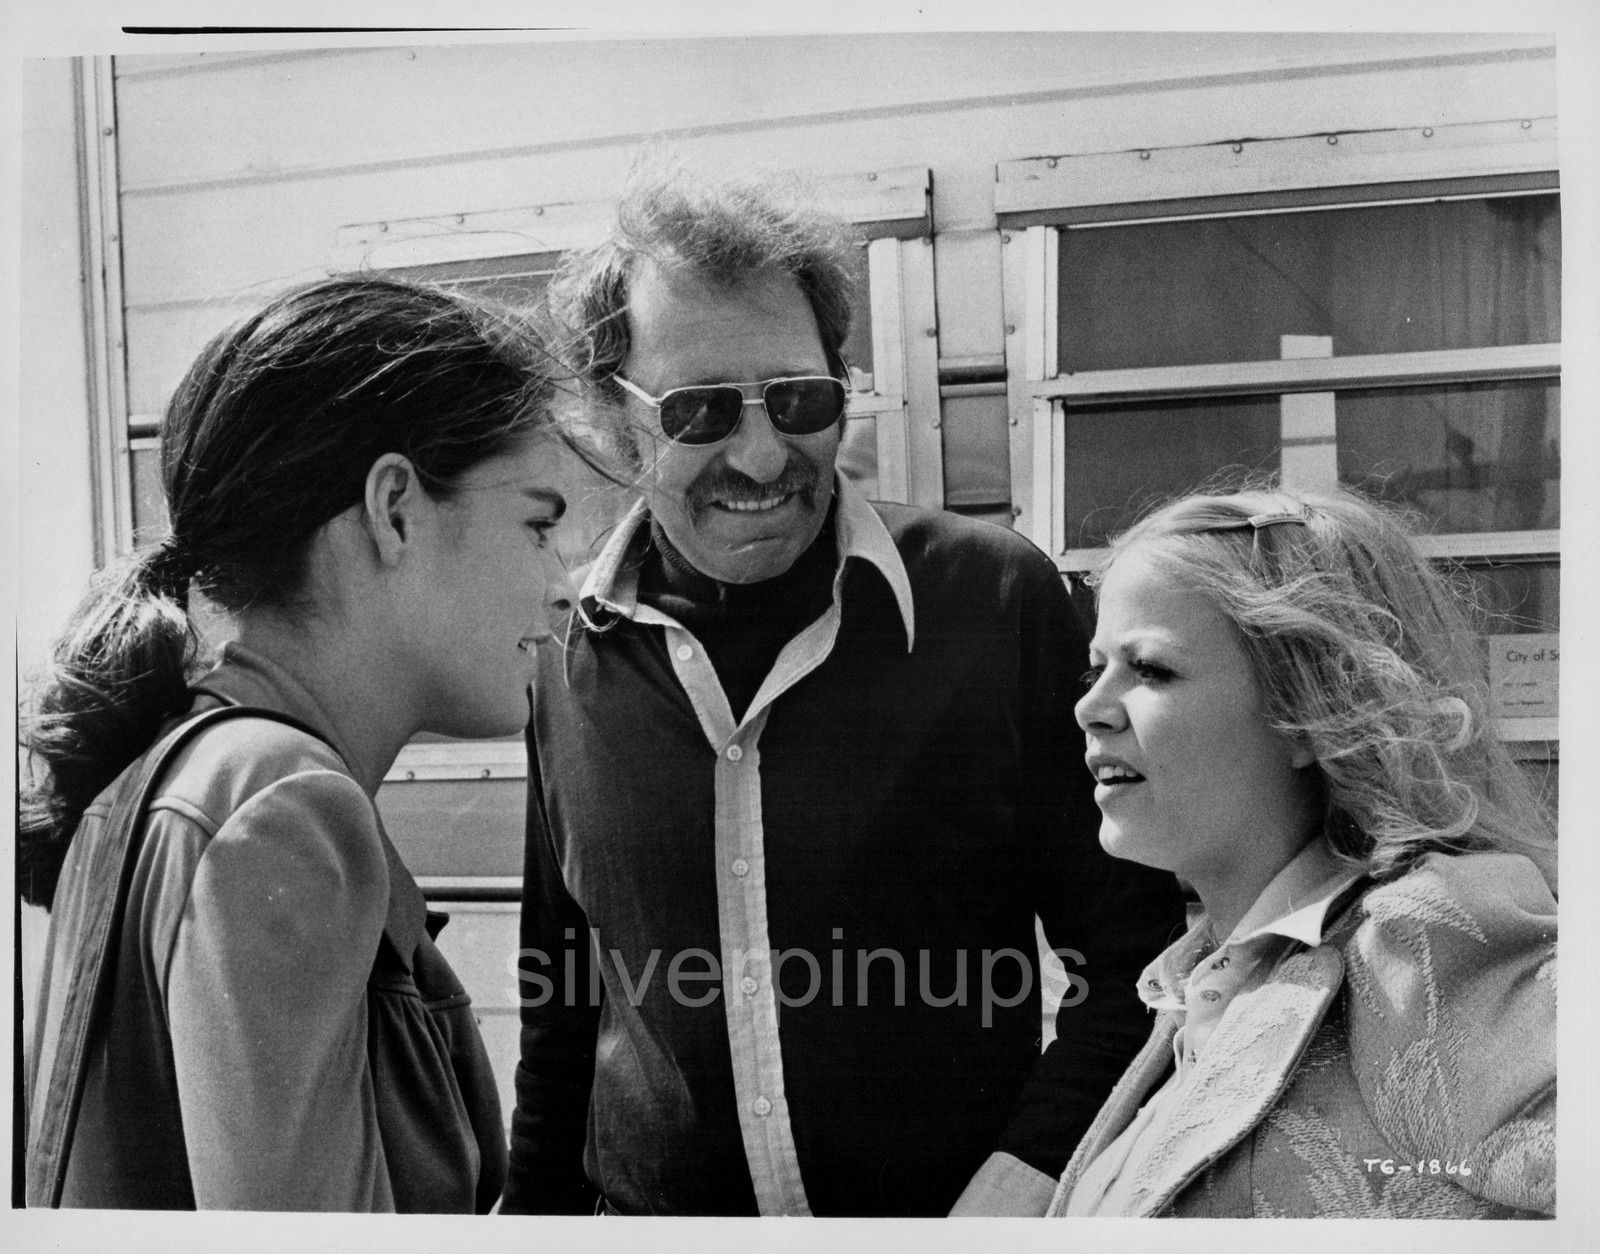 Orig 1972 Ali Macgraw Sally Struthers Candid On Location The Getaway Silverpinups